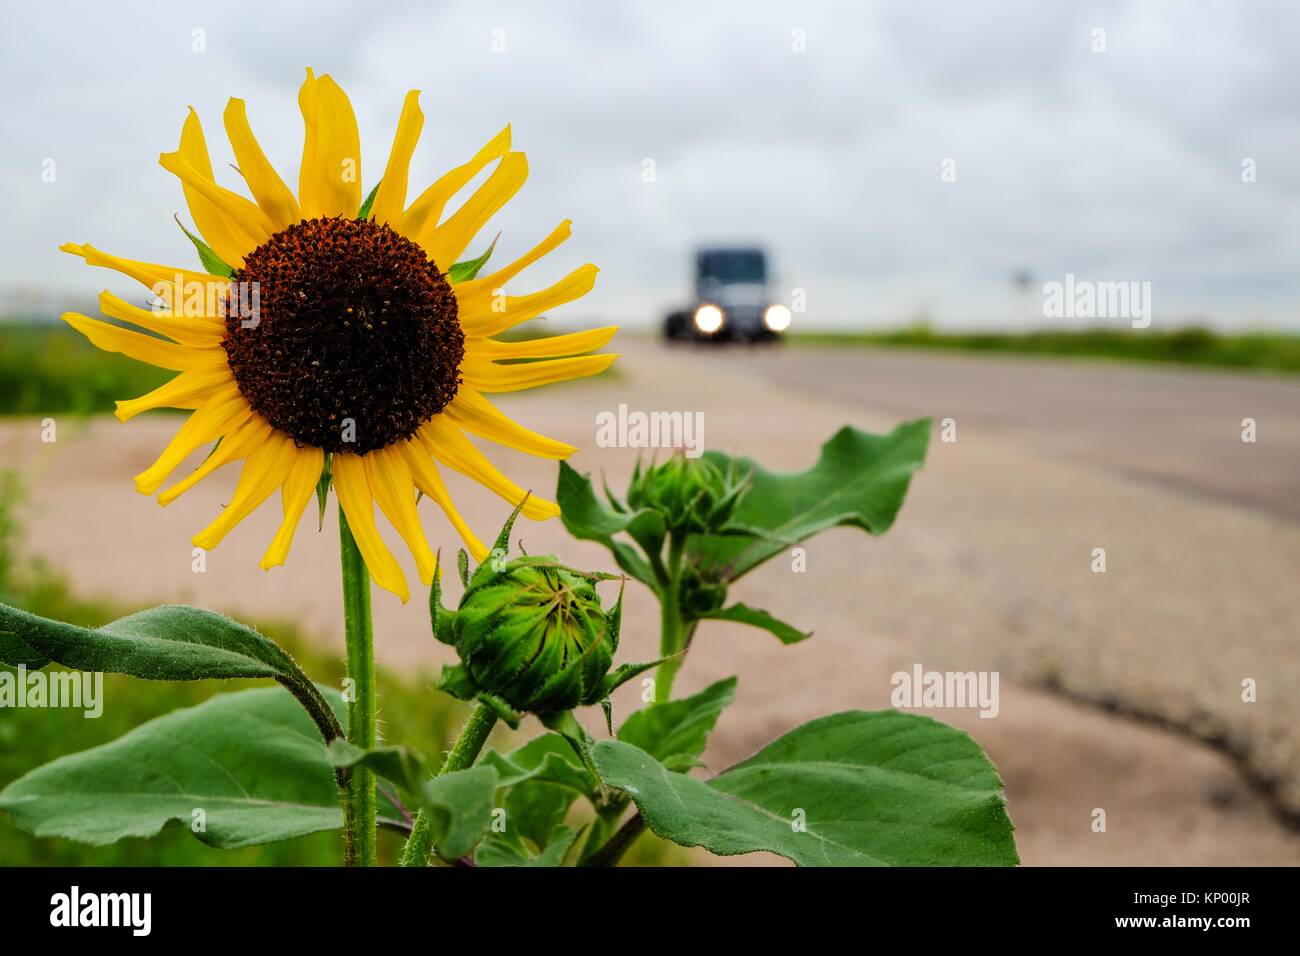 Sunflower on the road and a truck. Freight transportation concept. Stock Photo